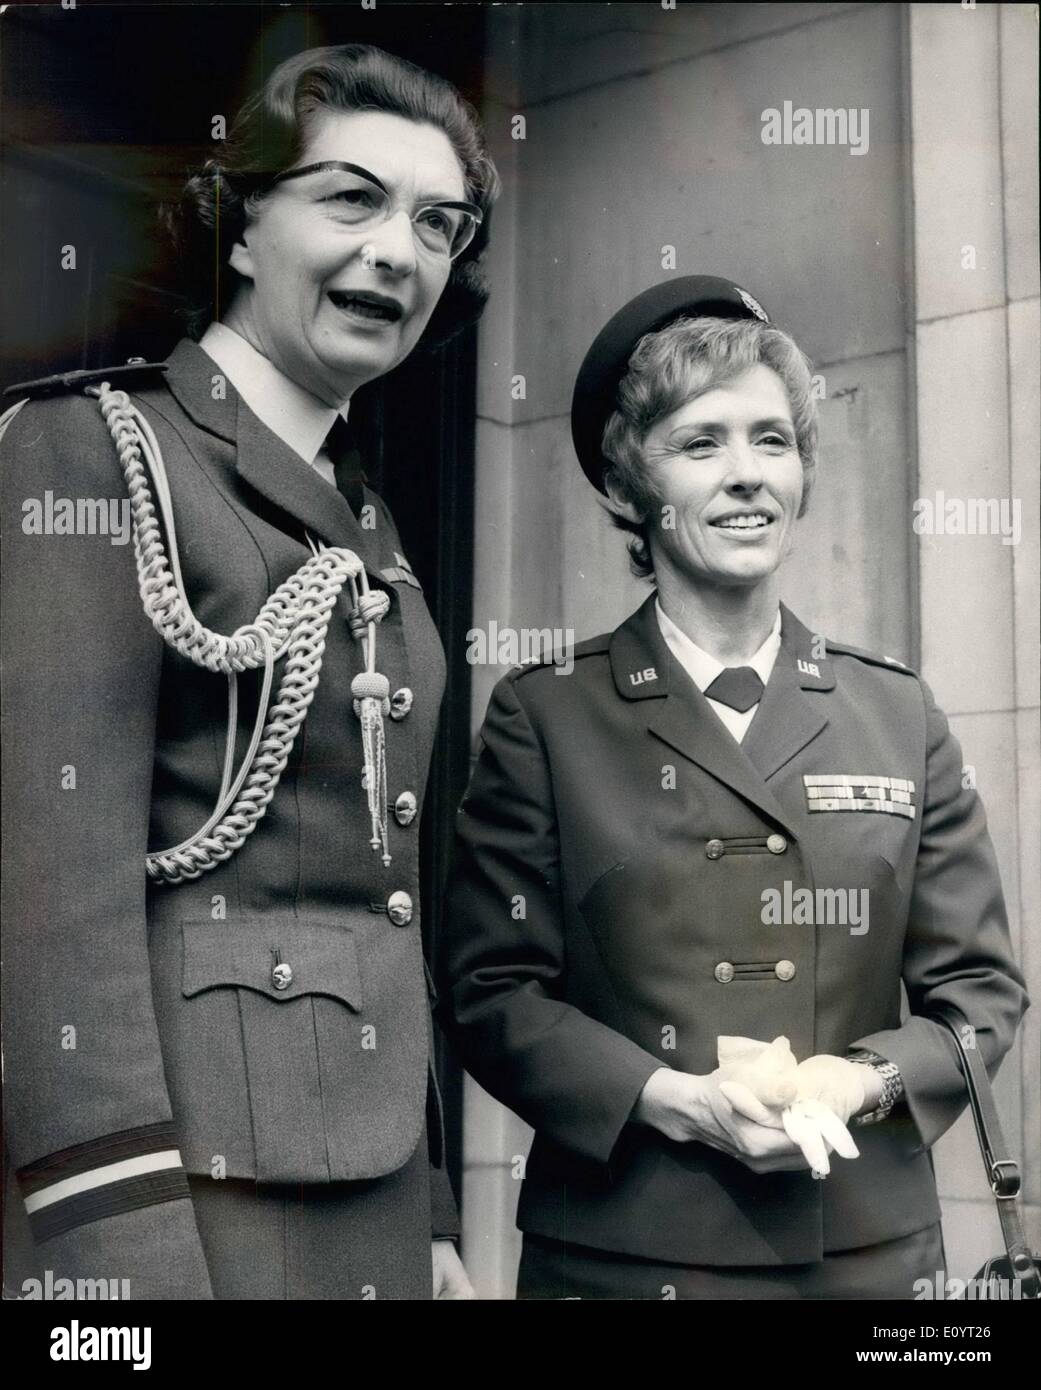 May 05, 1971 - Colonel Jeanne M. Holm, Director Of Women In the Air Force (USAF) Meets Her British Counterpart. Colonel Jeanne M. Holm, Director of women in the Air Force (USAF) in in London paying a courtesy visit to her British counterpart, Air commodore Philippa F. Marshall, Director women's Royal Air Force. Photo Shows: Air Commodore Philipa F. Marshall, Director women's Royal air Force (on left) pictured today with Colonel Jeanne M. Holm Director of women in the Air Force (USAF), at Adastral House, Theobalds road, London. Stock Photo